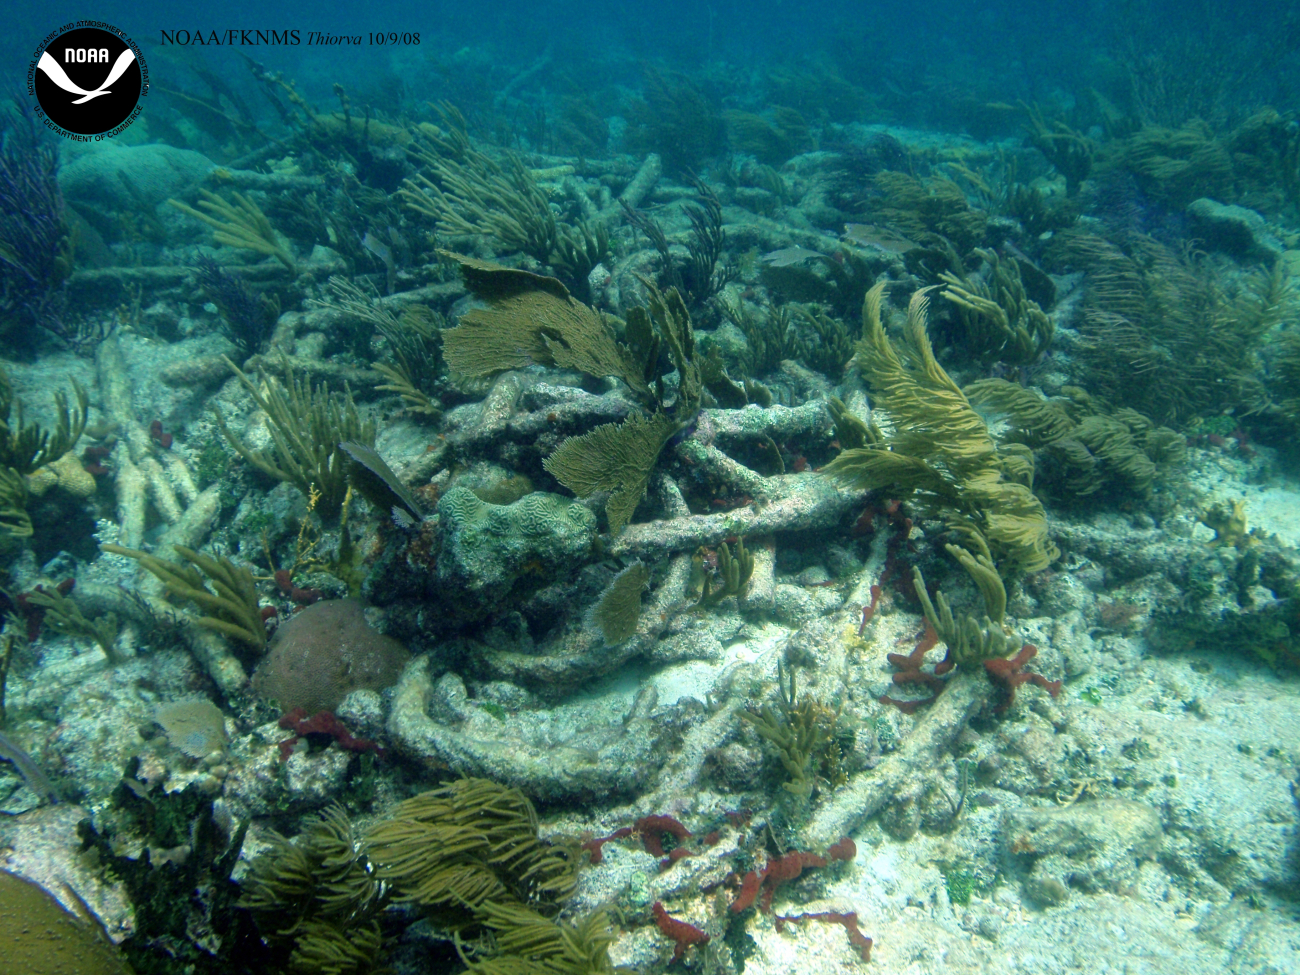 Debris associated with the wreck of the Ship THIORVA surrounded bylush coral growth